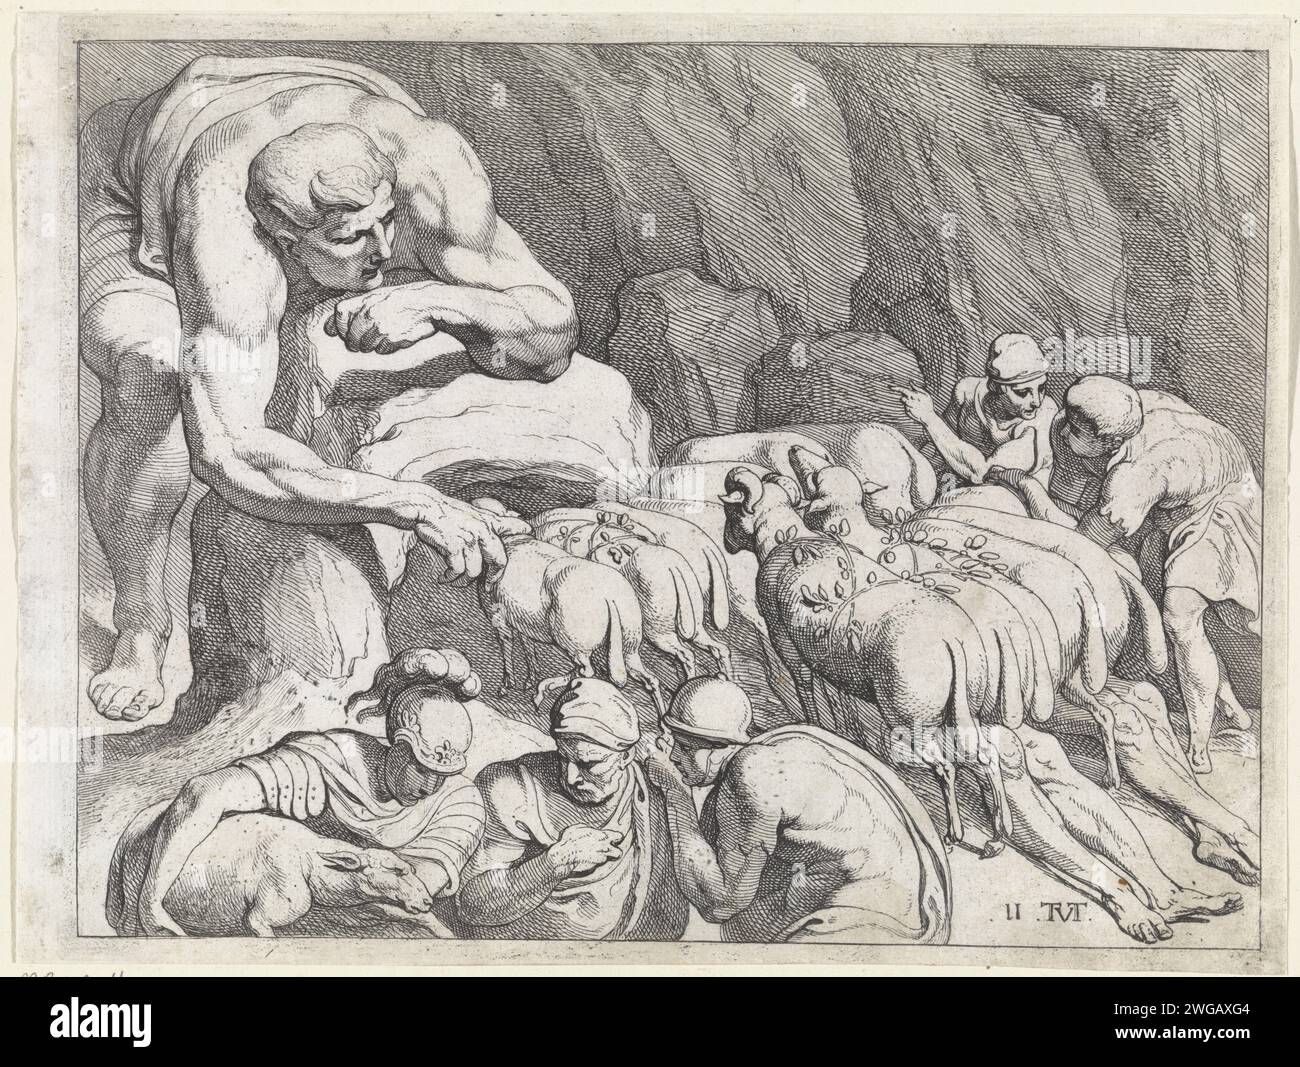 Odysseus escaped from the cave of Polyphemus, Theodoor van Thulden, After Francesco Primaticcio, 1632 - 1633 print The Giant Polyphemus made by Odysseus Blind opens his cave to let his herd of sheep out. Odysseus and his men escape the giant by hanging under the rams and sheep. Paris paper etching / engraving Ulysses and his men slip away concealed under rams Stock Photo